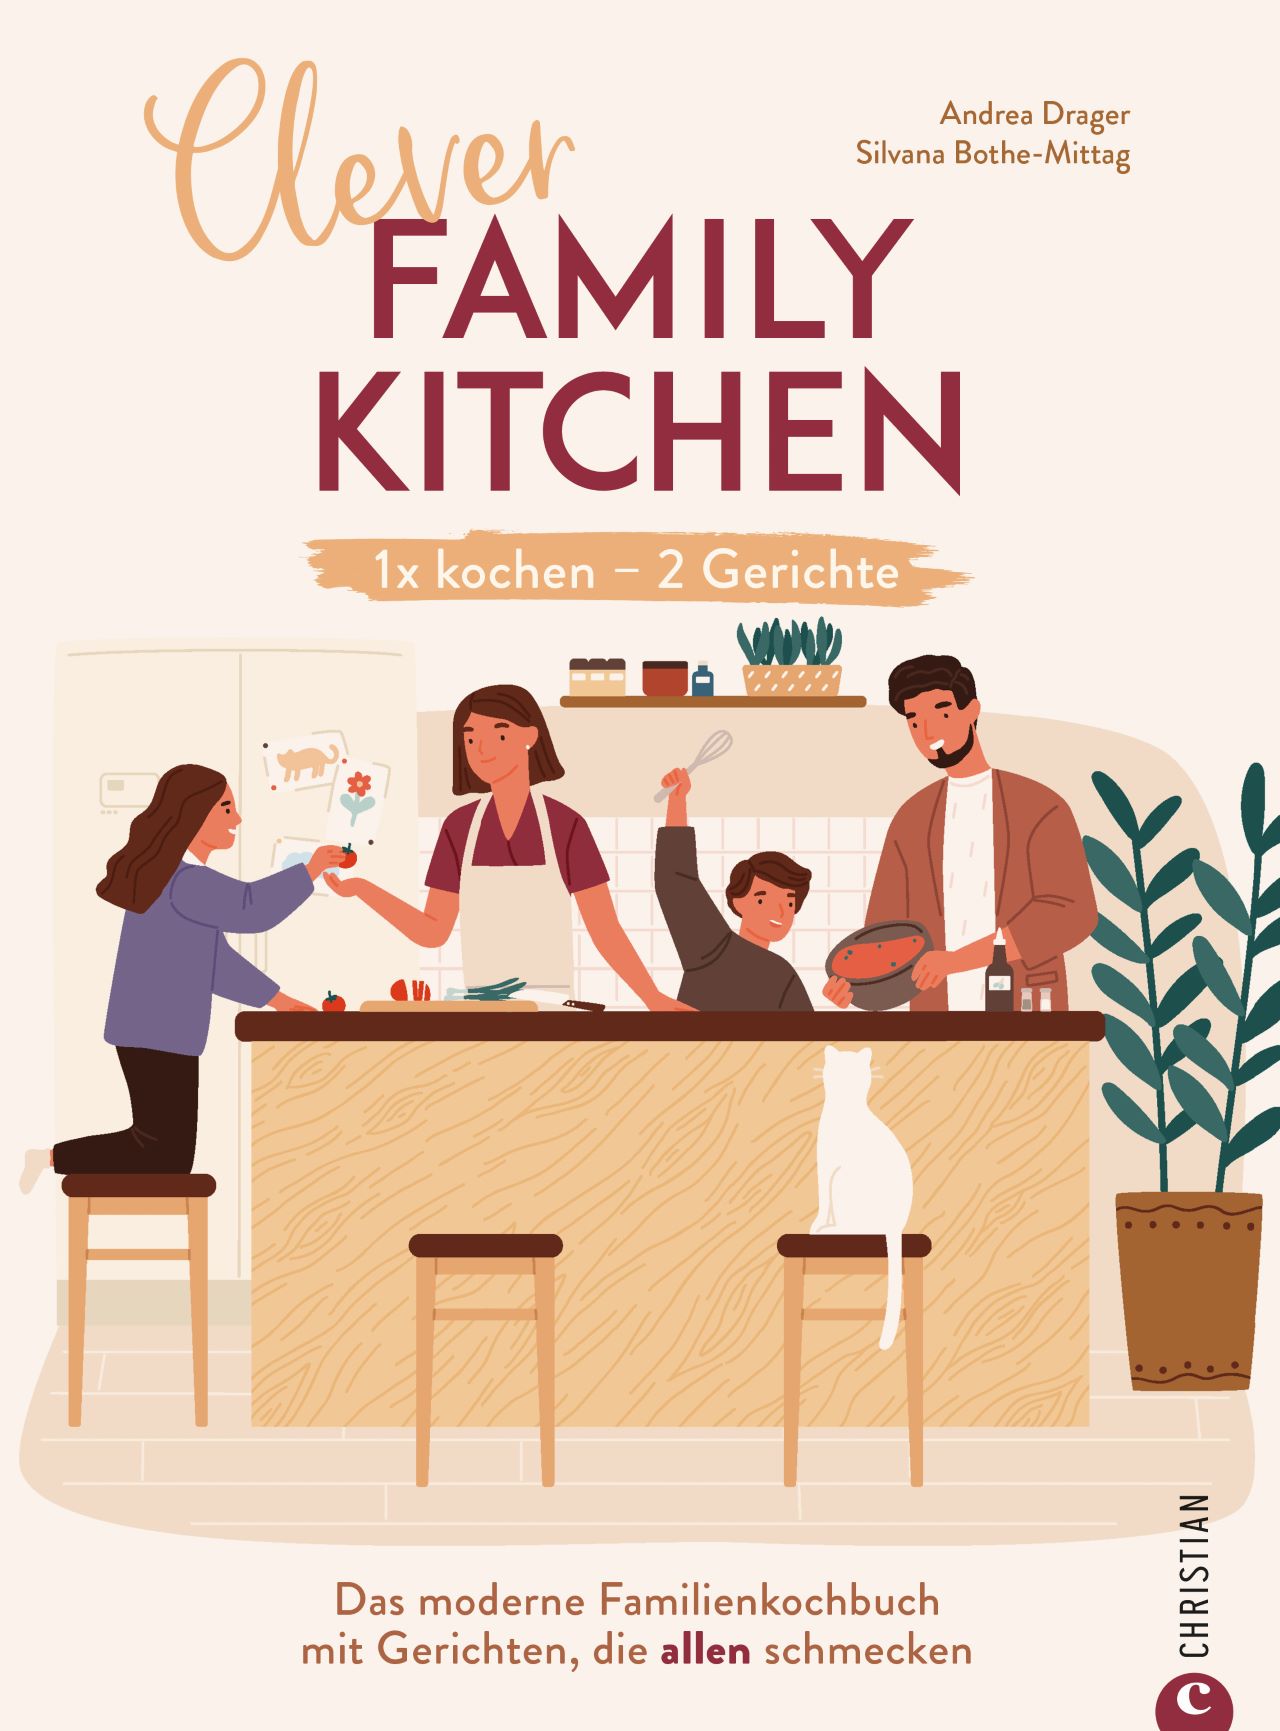 Clever Family Kitchen thumbnail